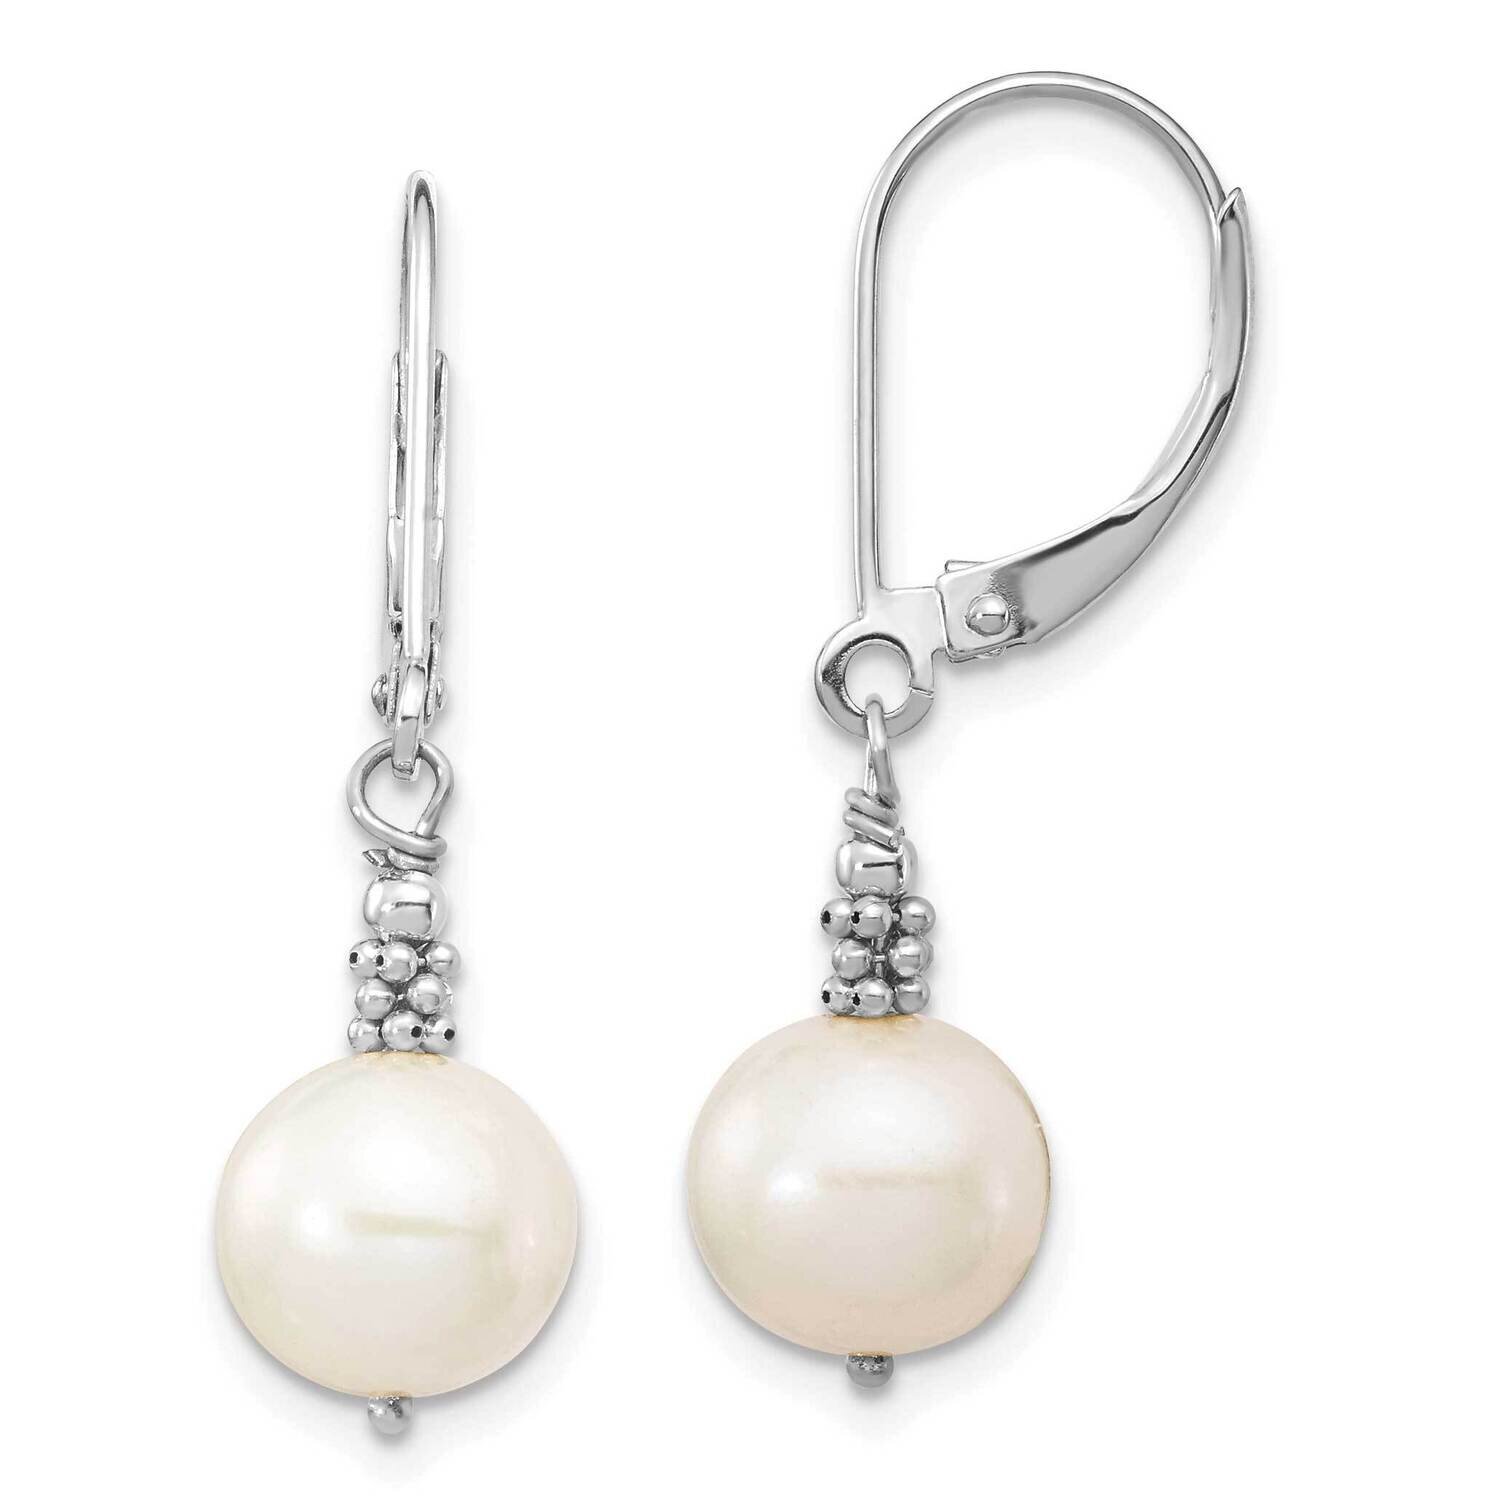 8-9mm Near Round White Cultured Freshwater Pearl Leverback Earrings 14k White Gold XFW654E